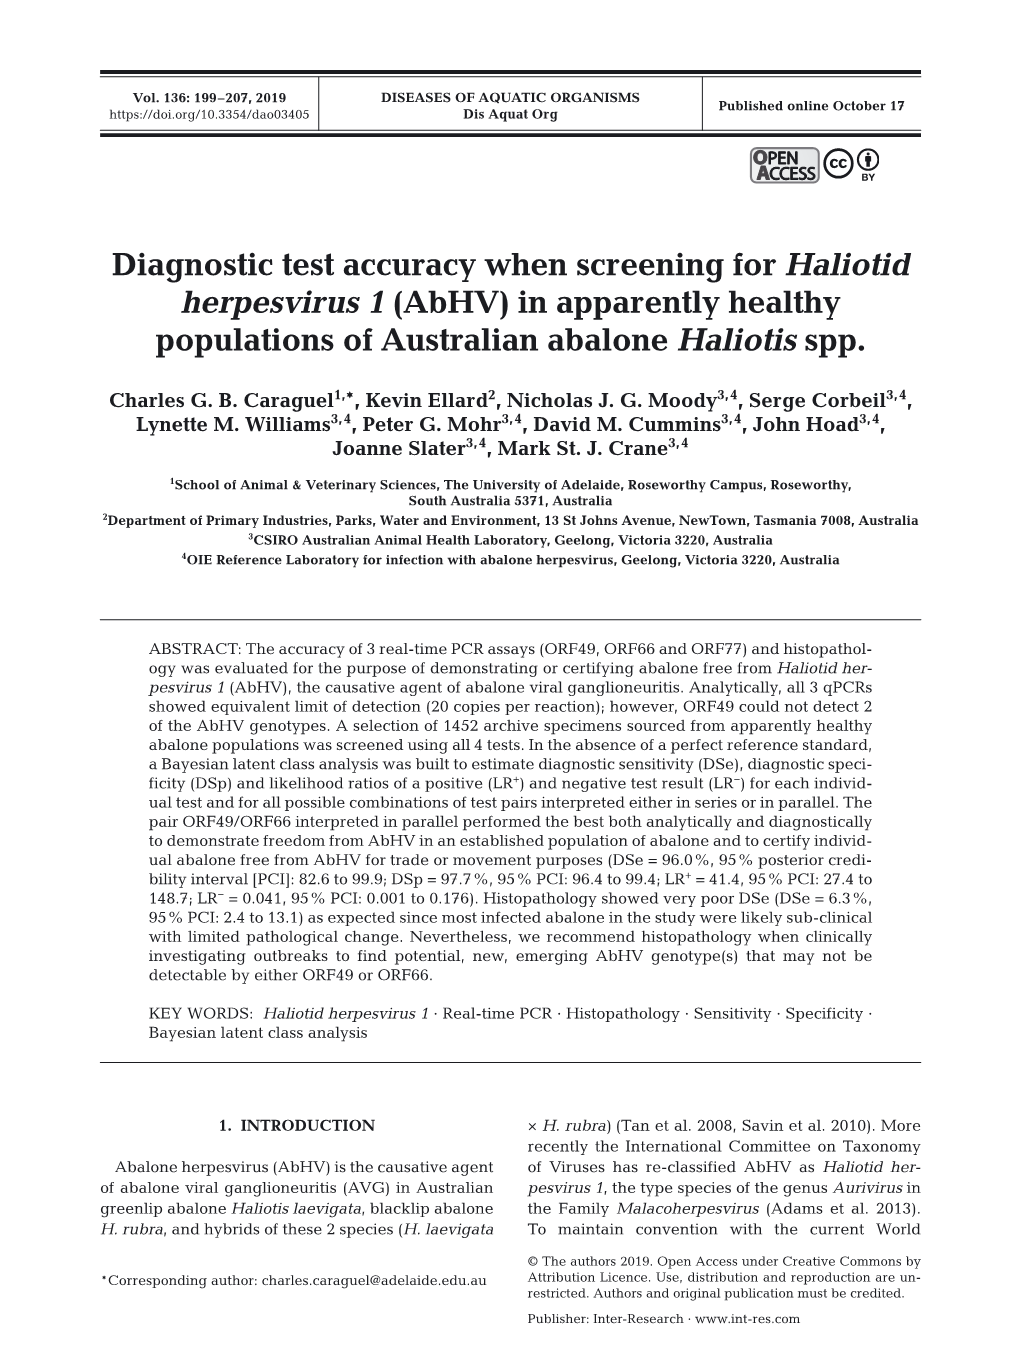 Diagnostic Test Accuracy When Screening for Haliotid Herpesvirus 1 (Abhv) in Apparently Healthy Populations of Australian Abalone Haliotis Spp